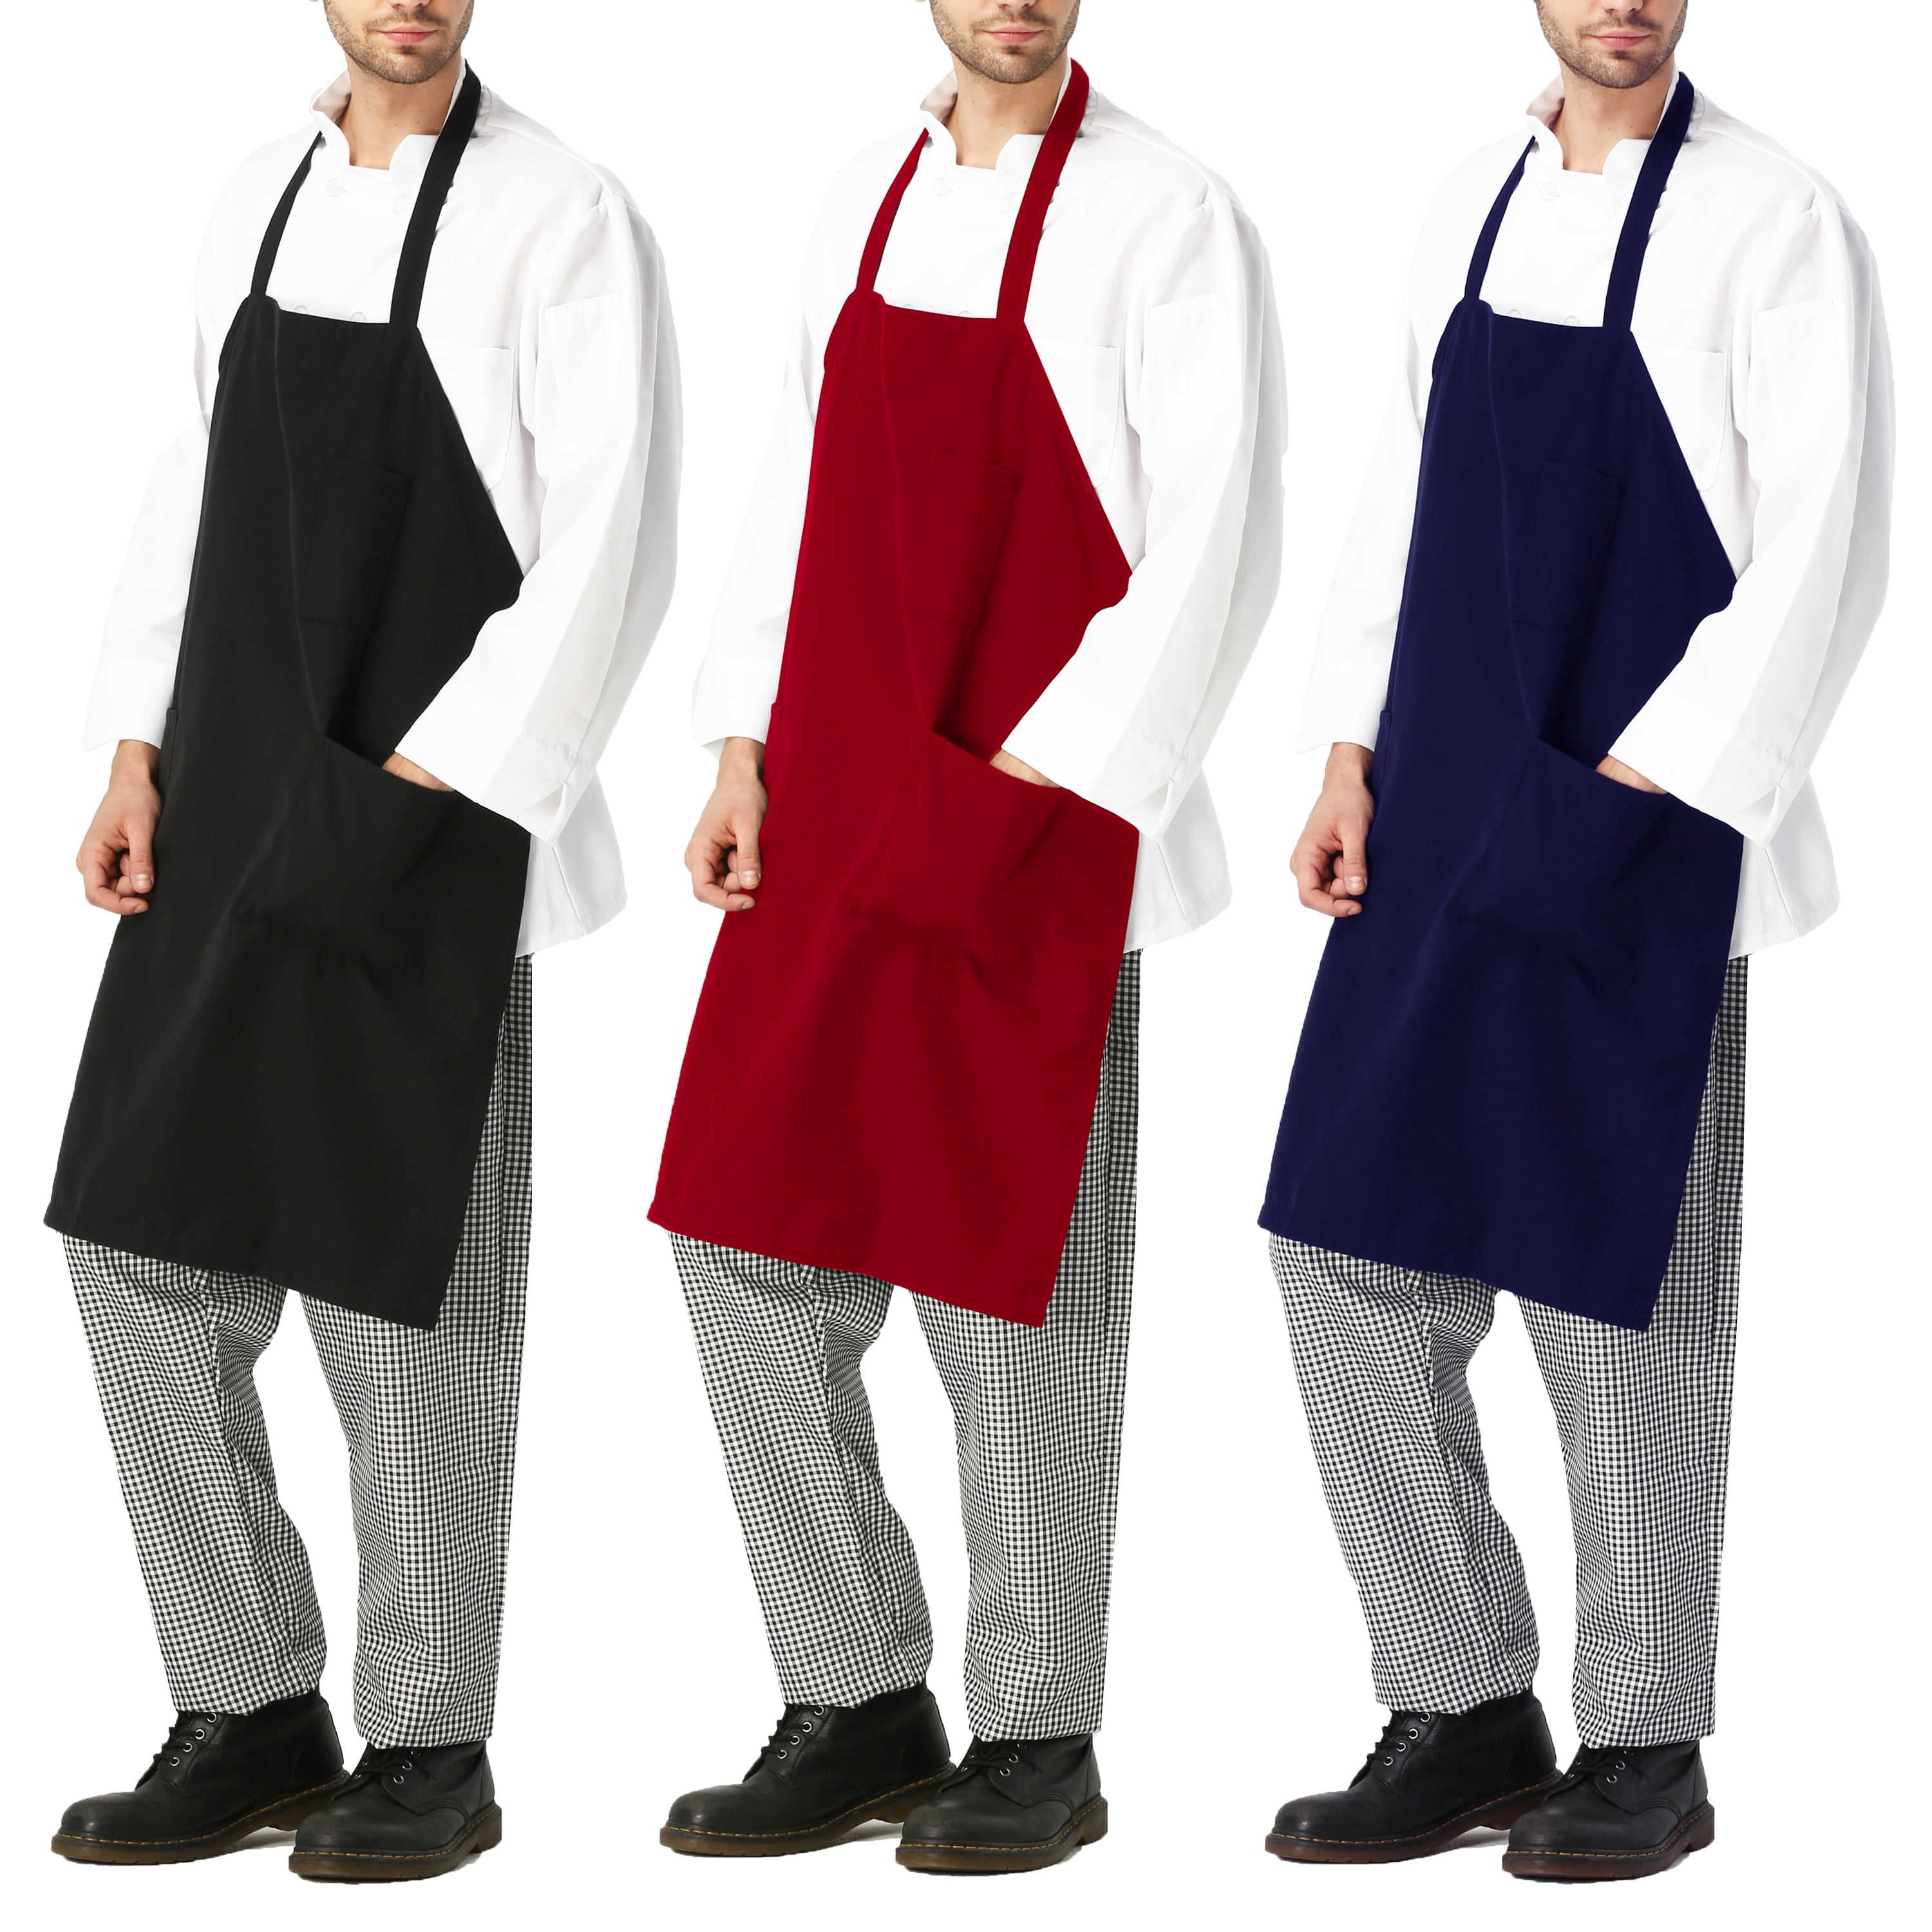 MILLTEX Restaurant Grilling Commercial Home Kitchen Chef Cooking Bib Apron 